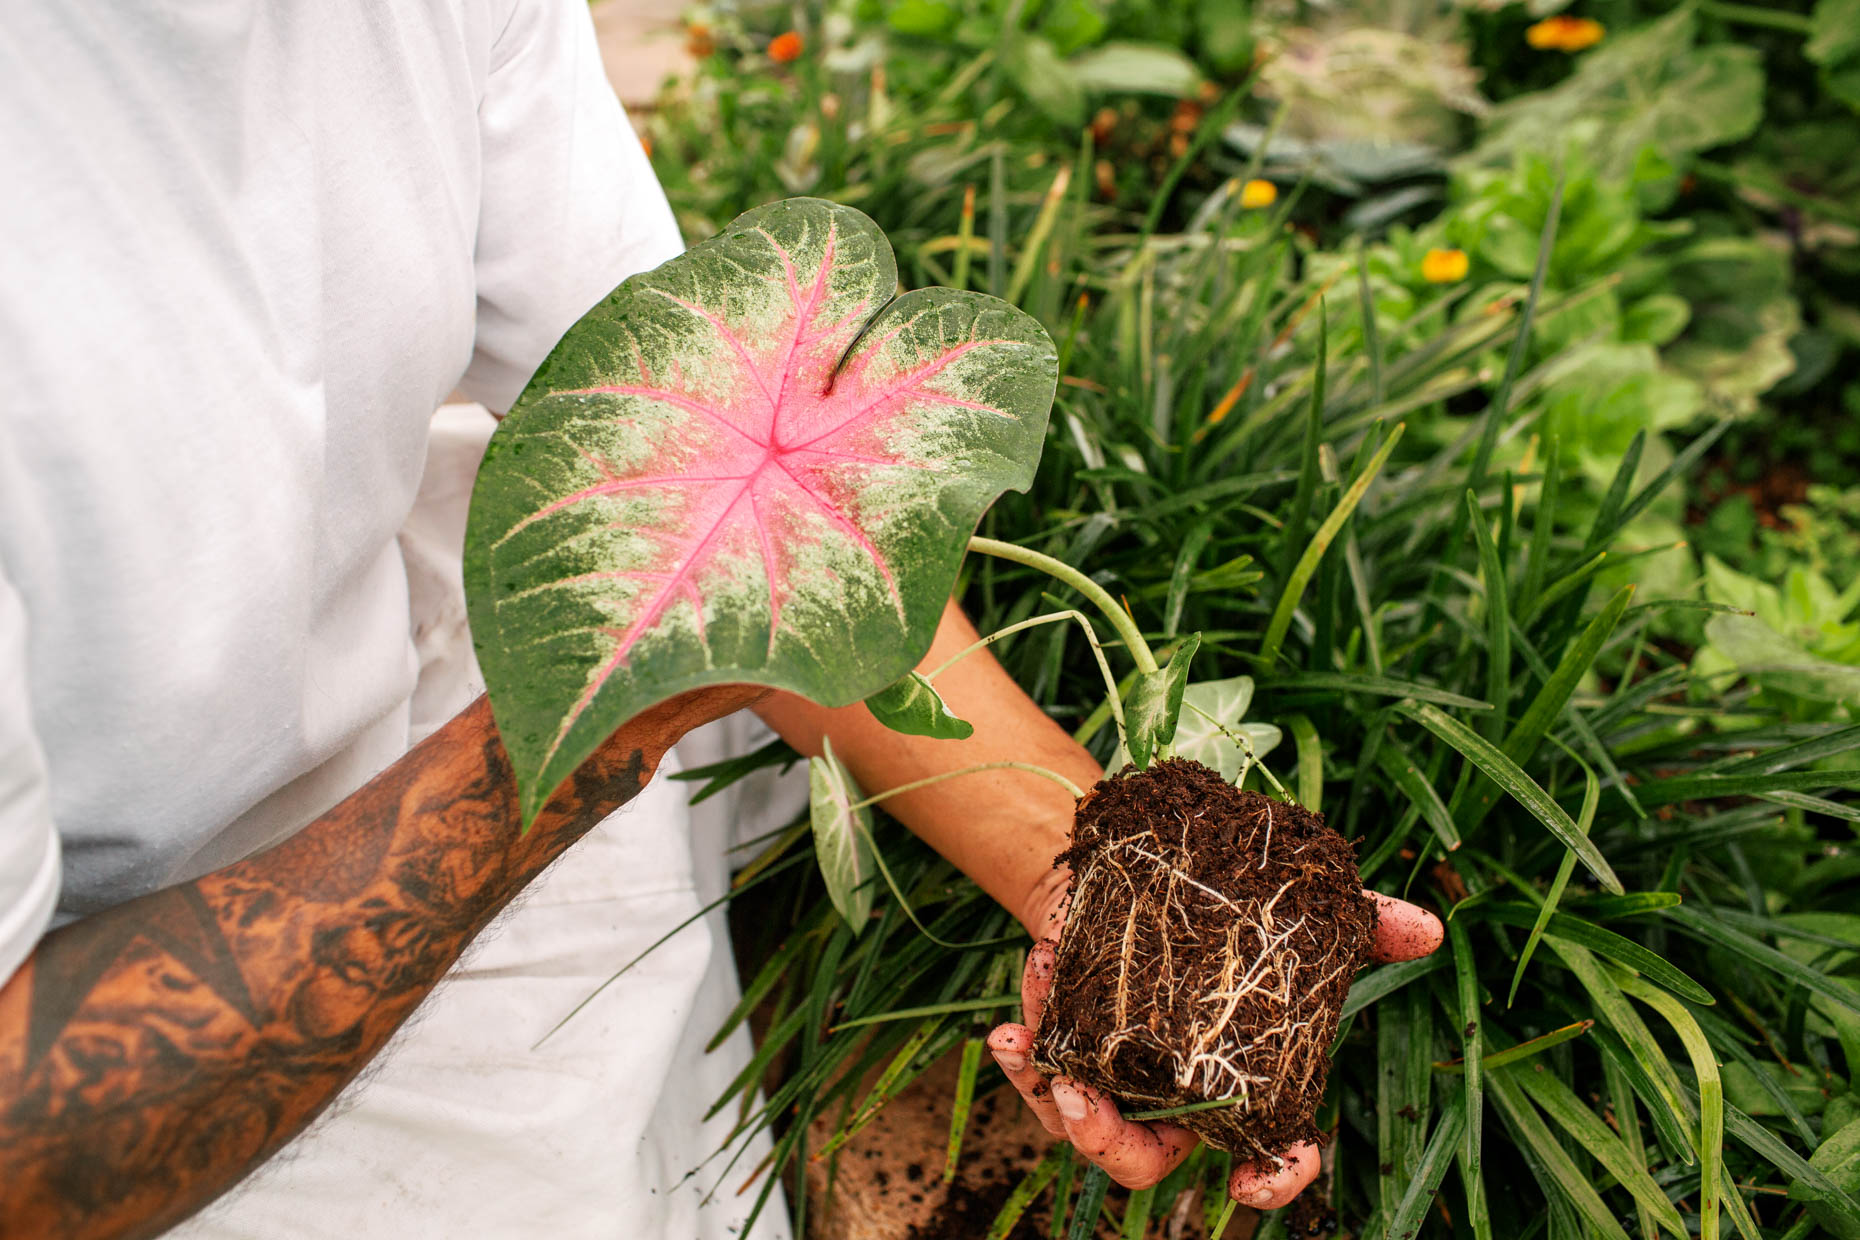 A tattoo arm of a prisoner holding a plant for an editorial